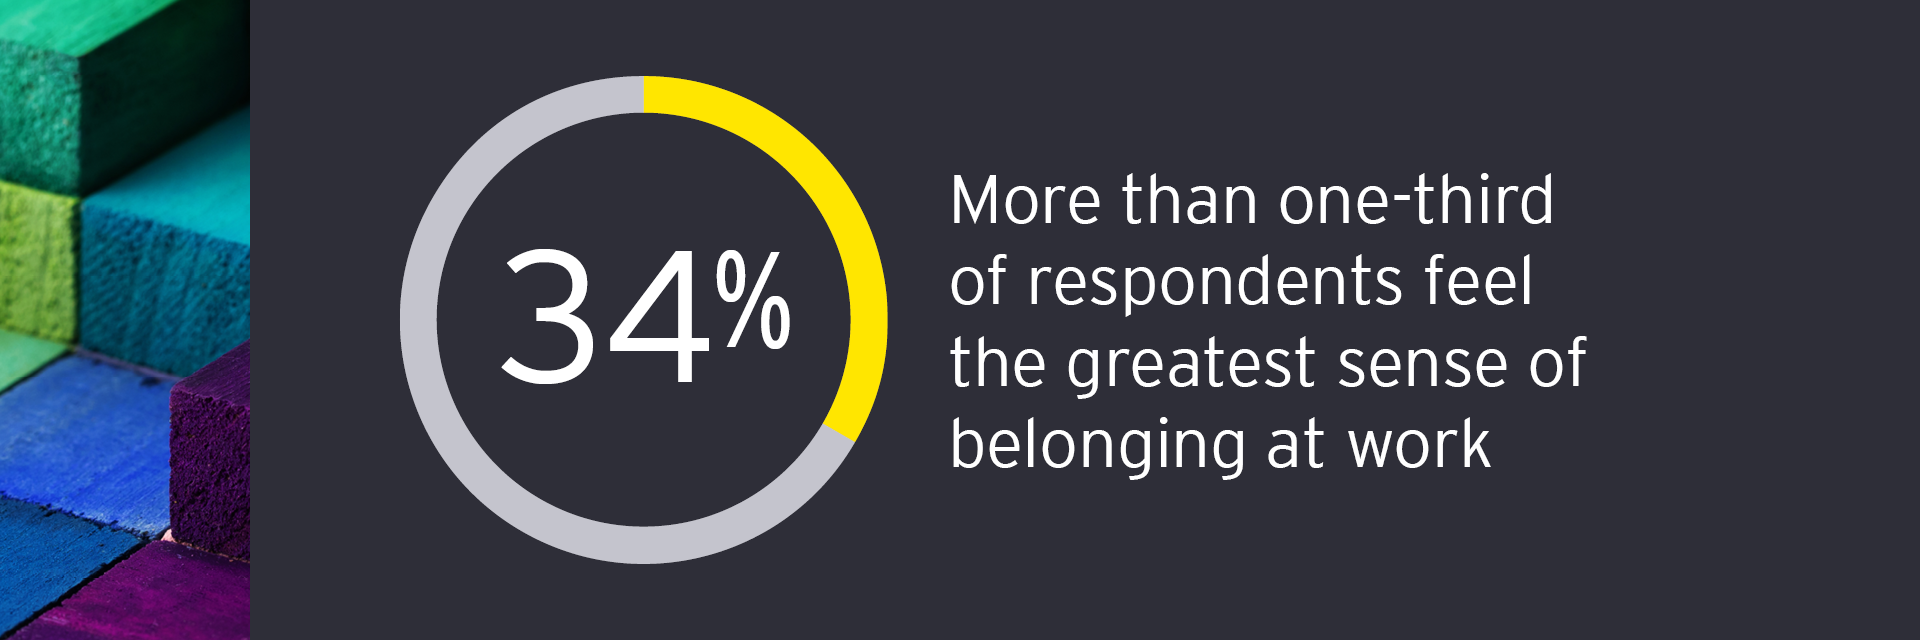 EY - 34% - more than one-third of respondents feel the greatest sense of belonging at work